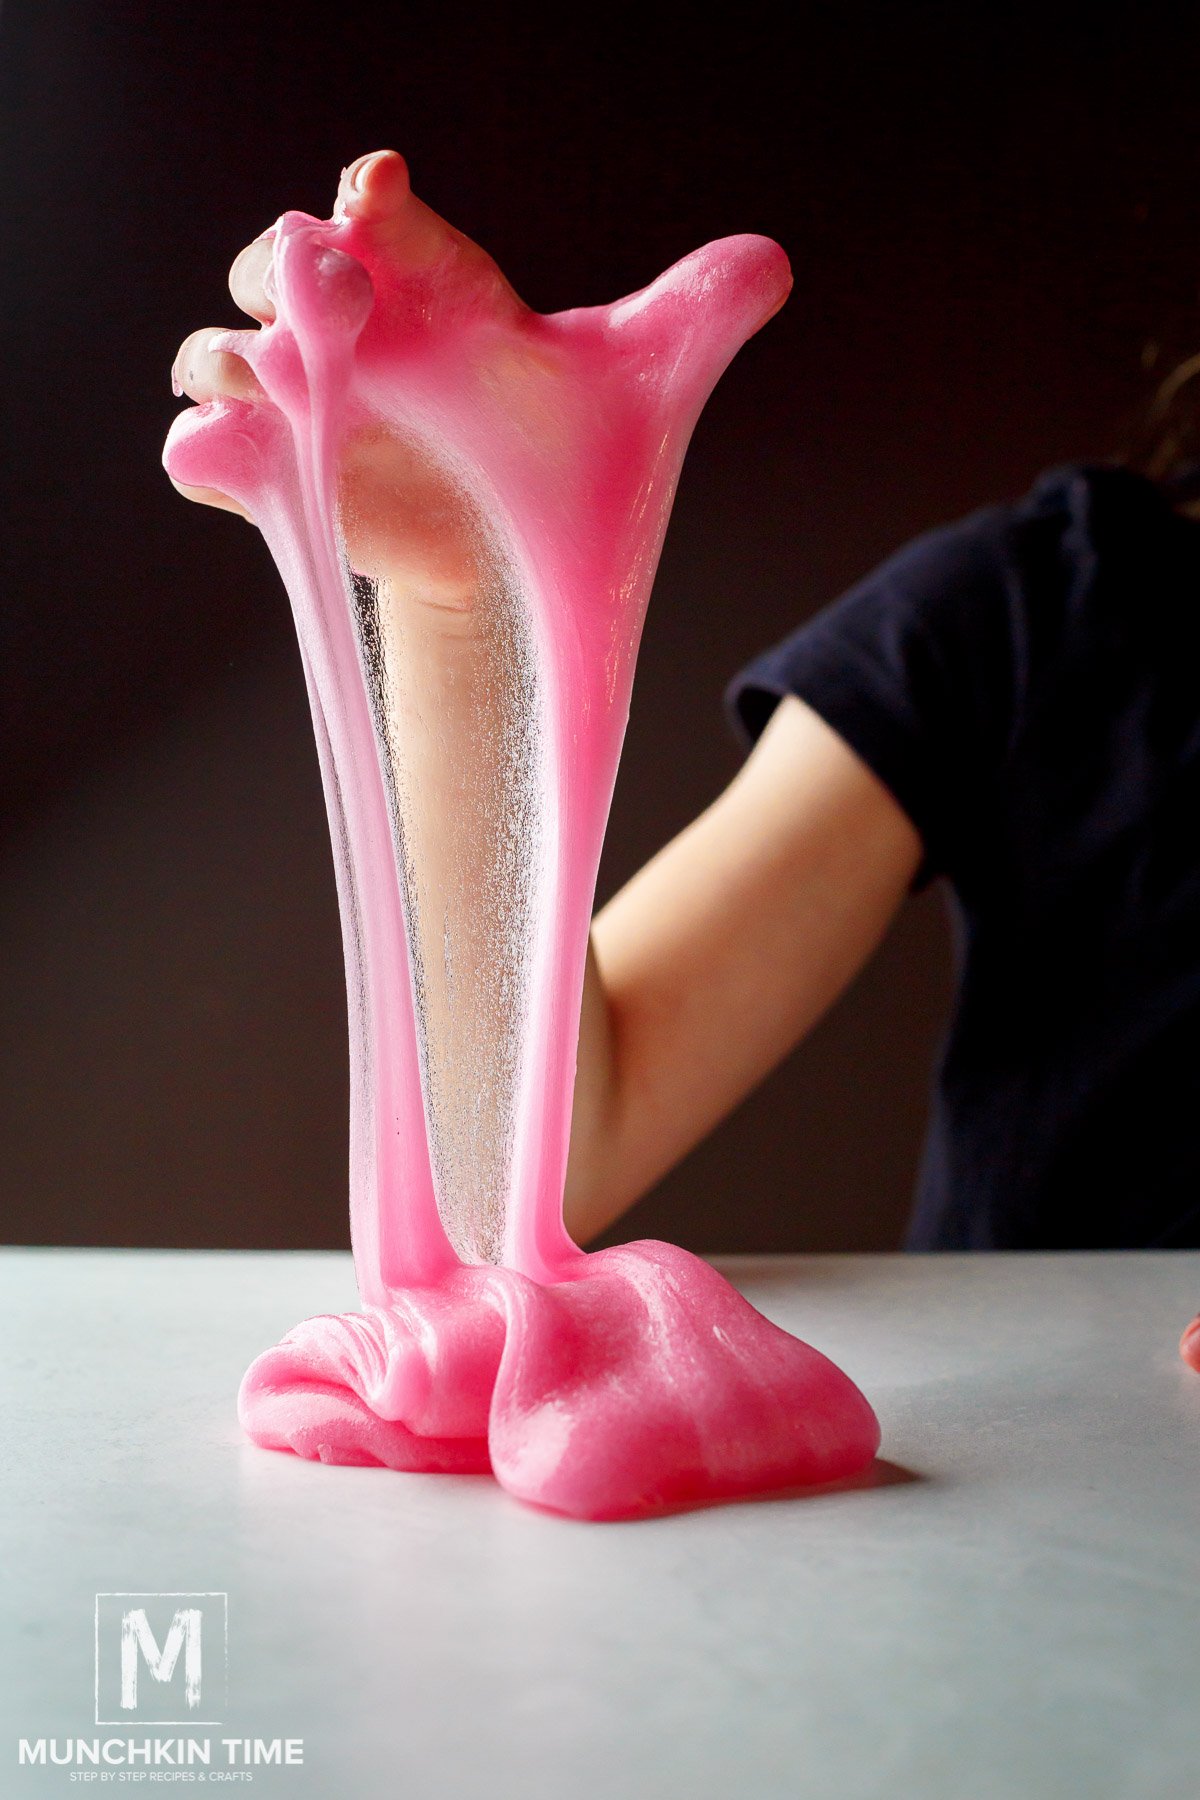 How to Make Slime With Glue and Baking Soda - Munchkin Time